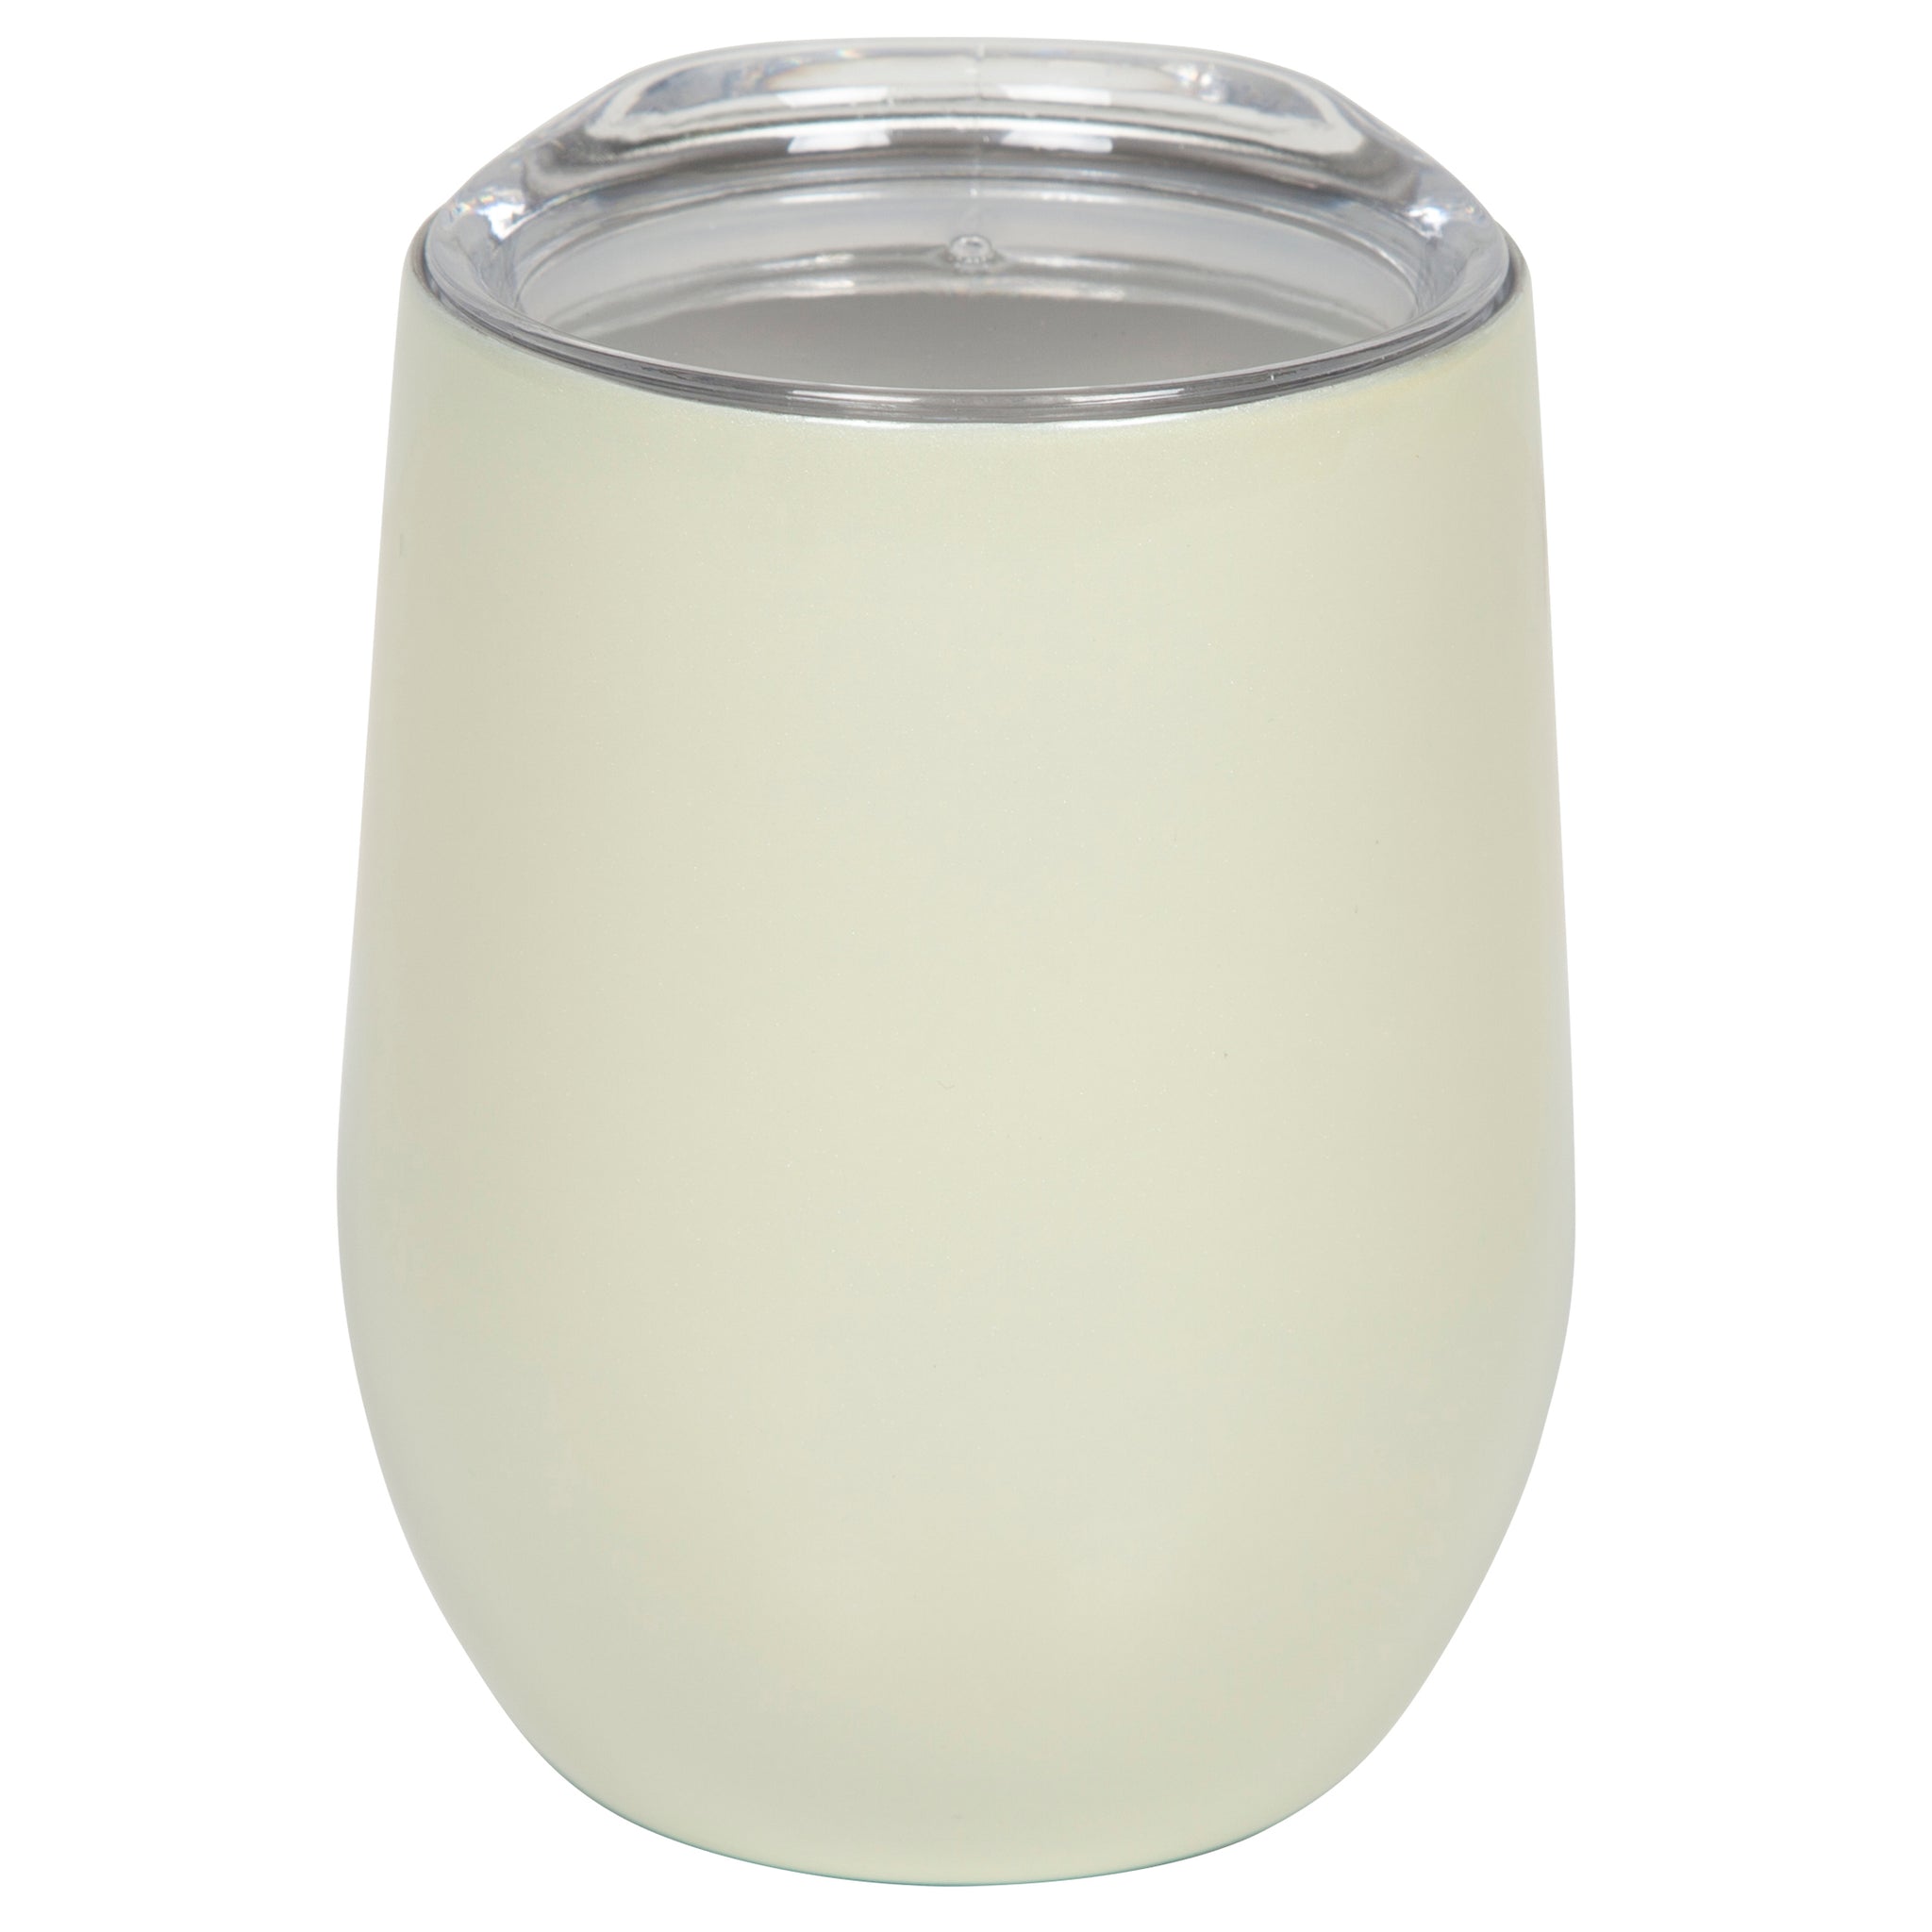 Wine Tumbler With Pressure Fit Lid - Double-Wall, Vacuum-Insulated